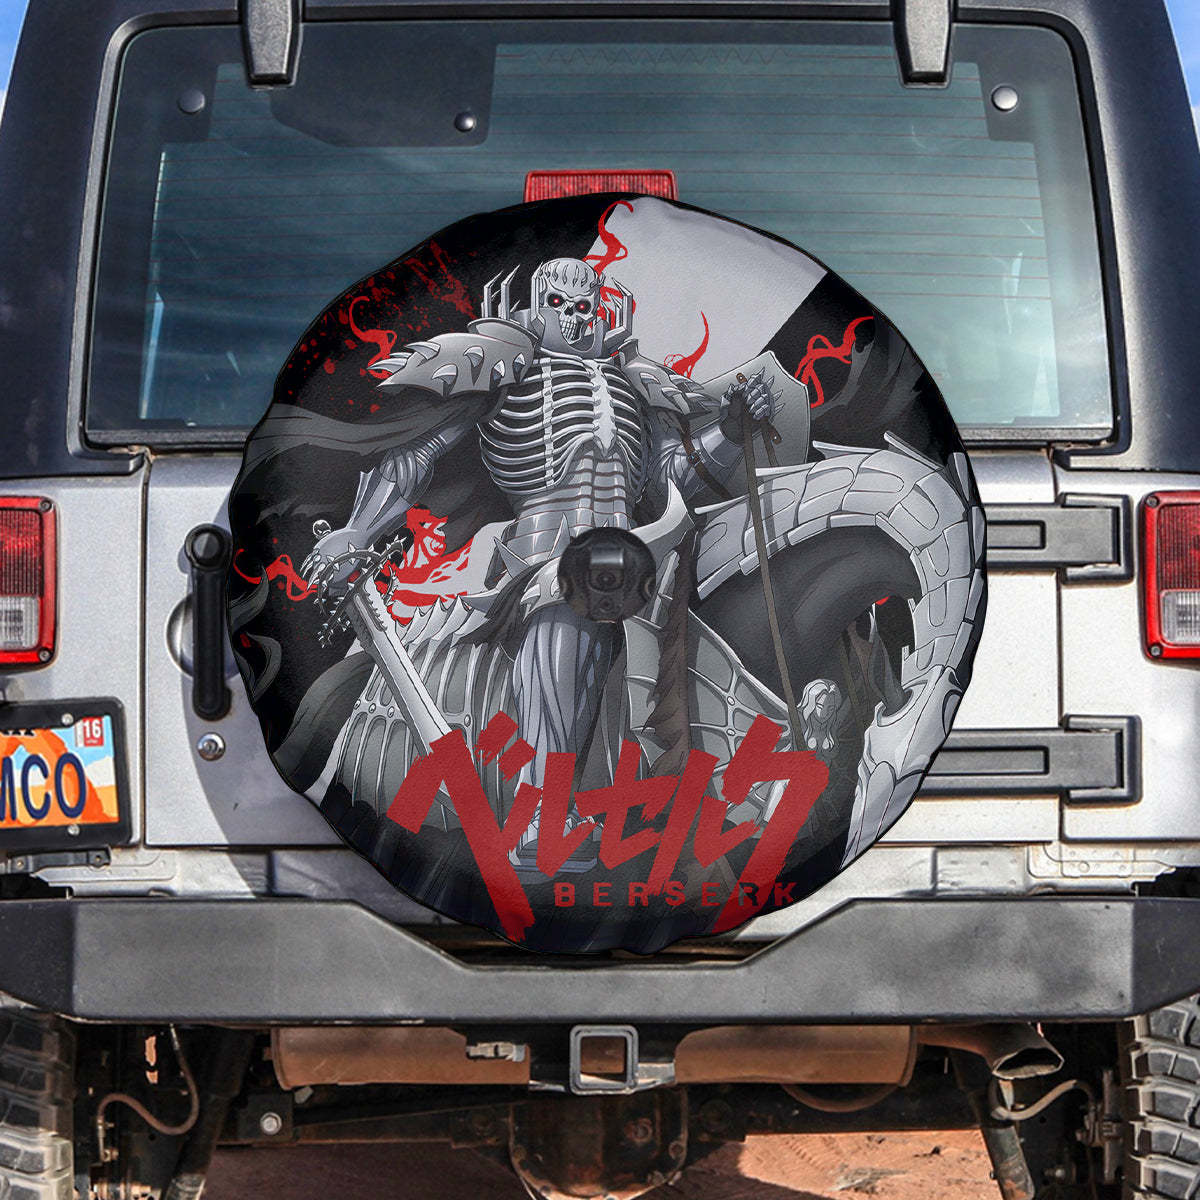 The Skull Knight Berserk Spare Tire Cover Black Blood Style